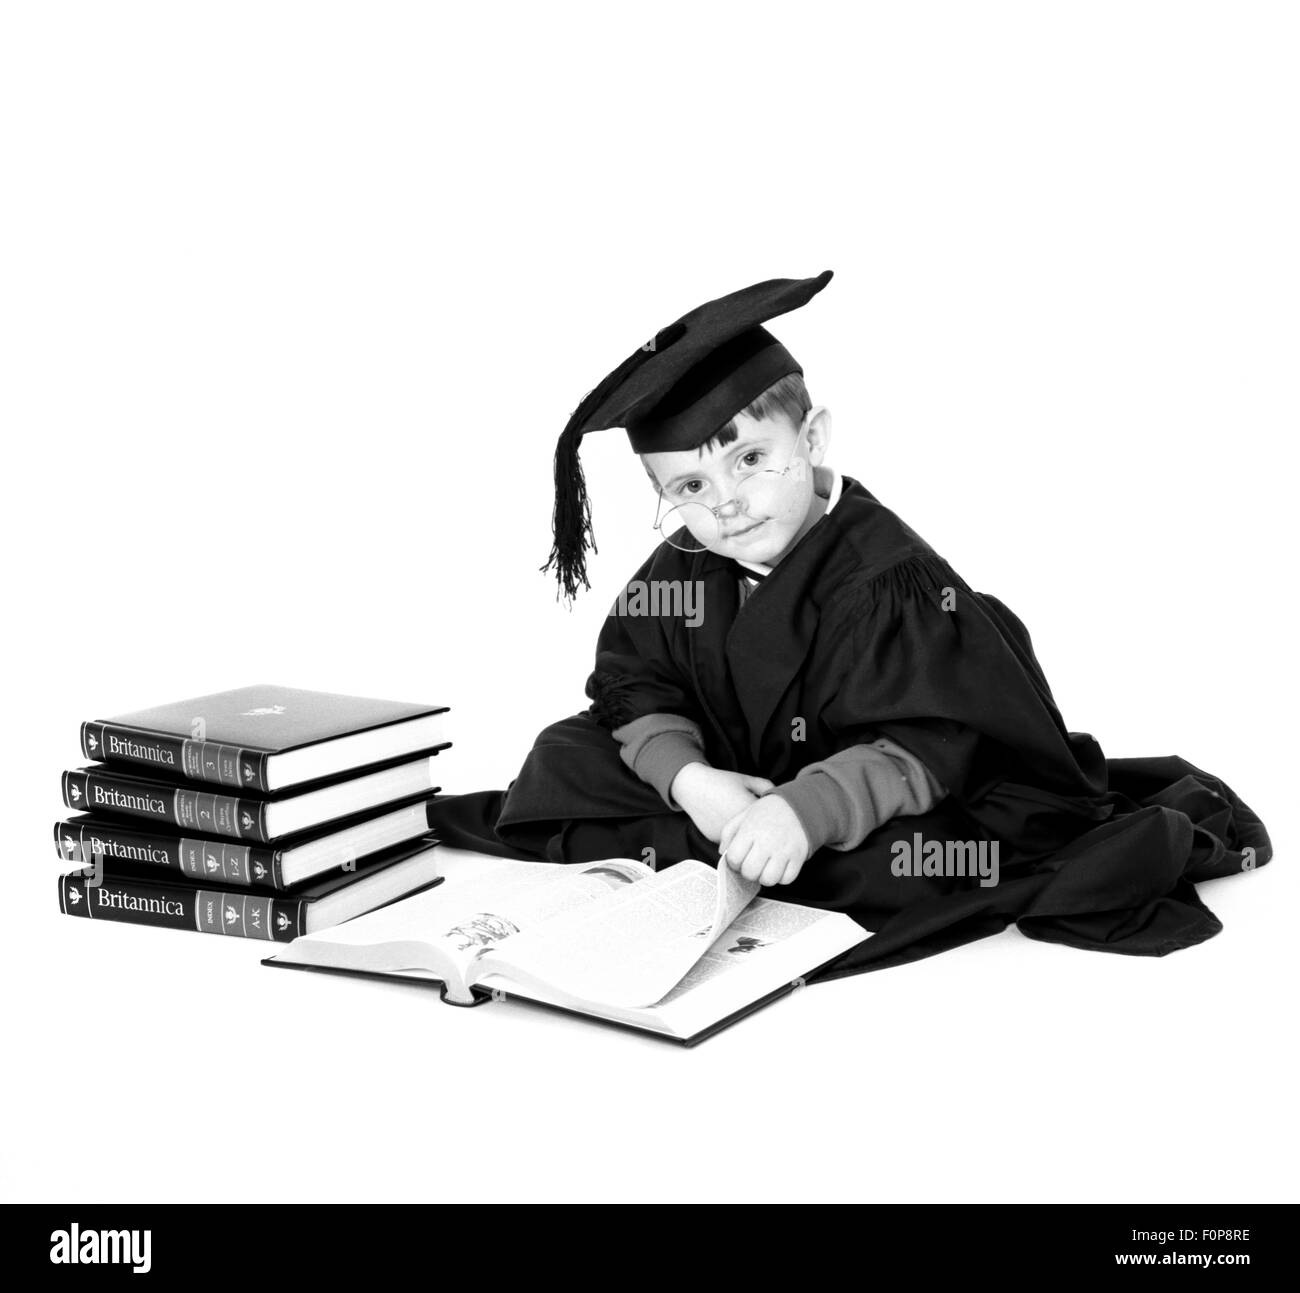 Young boy dressed in mortar board and gown reading Encyclopaedia Britannica Stock Photo